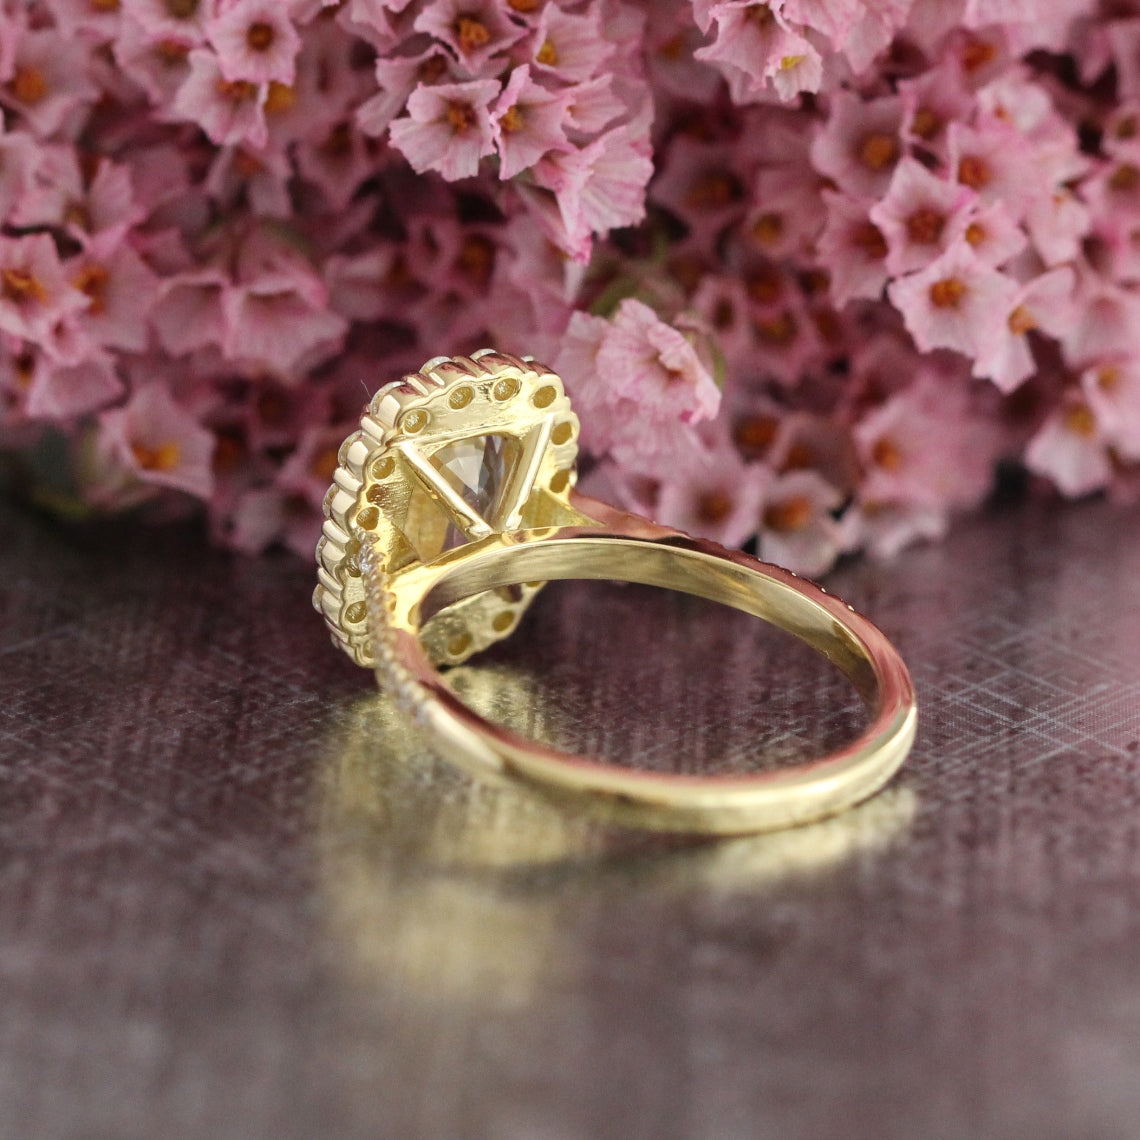 Natural Champagne Yellow Sapphire Ring in 18k Yellow Gold Large Halo Diamond, Size 6.25